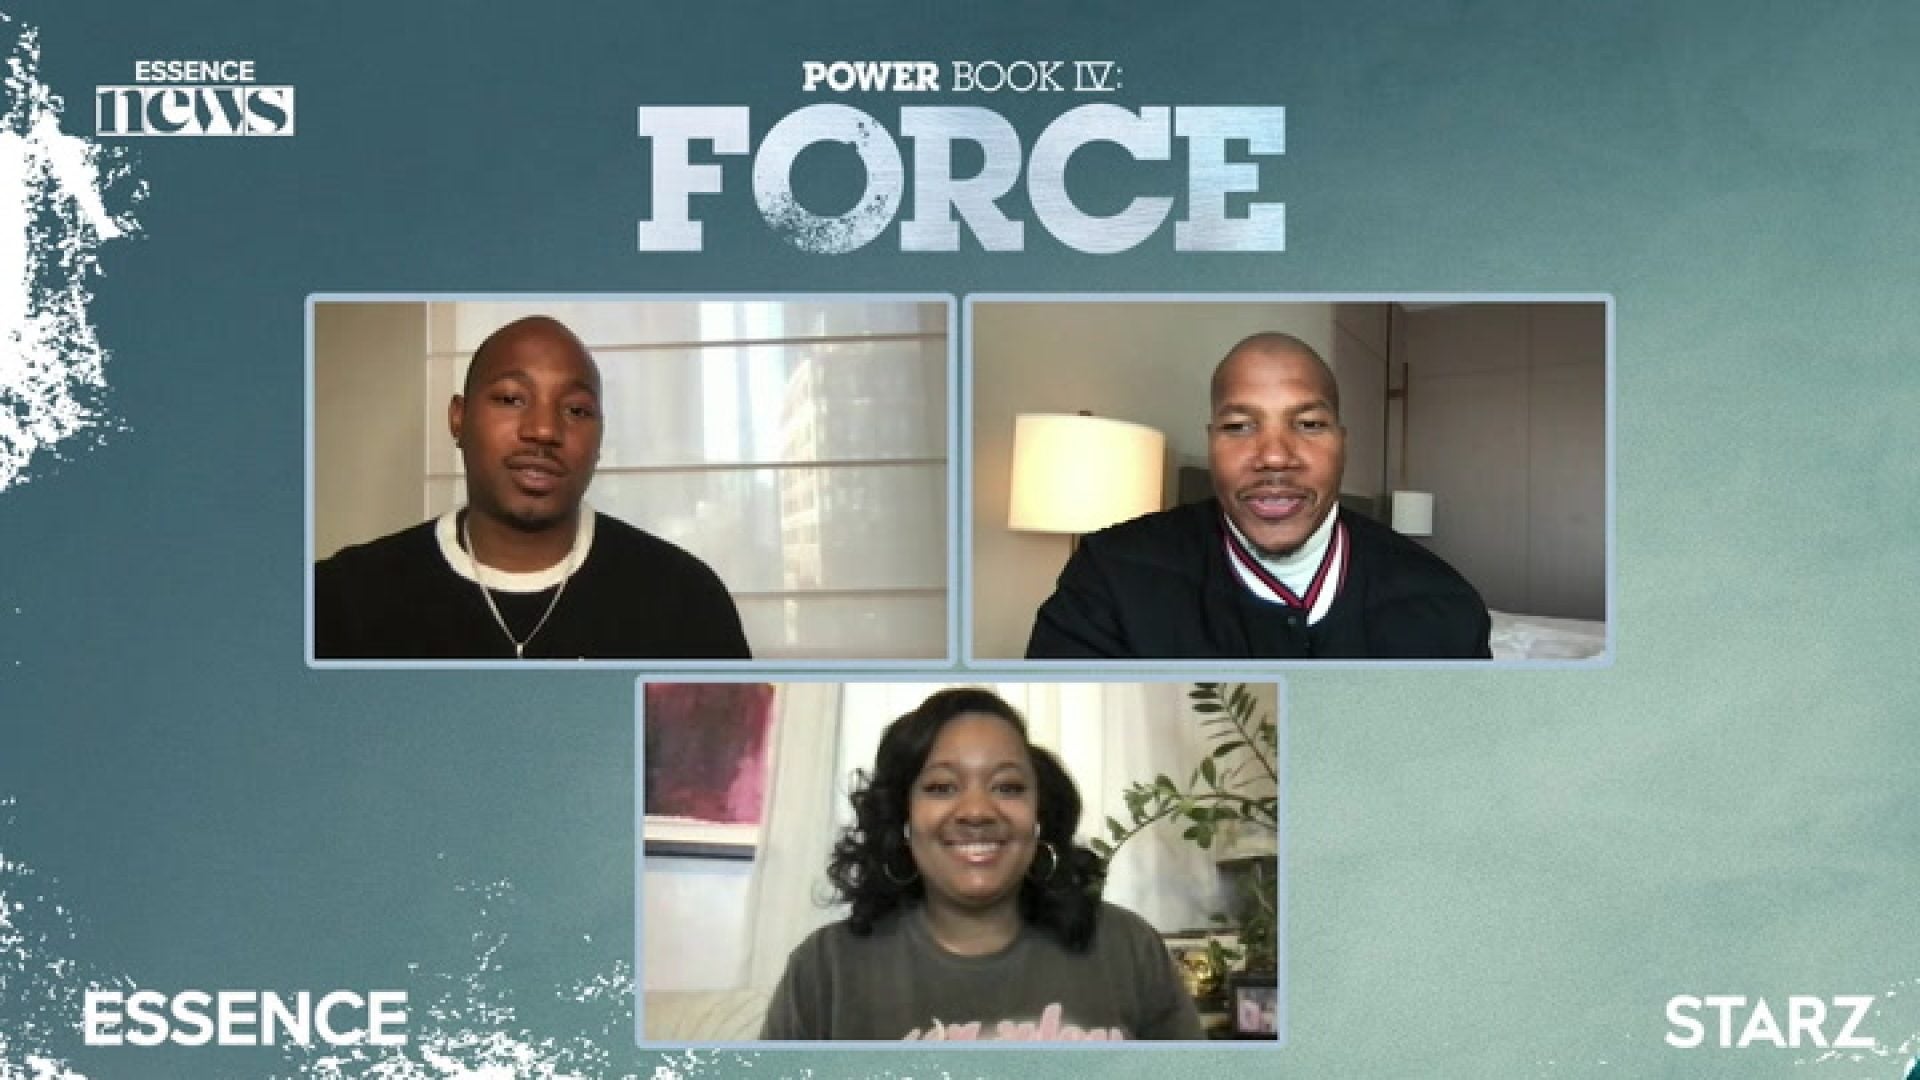 Kris Lofton and Isaac Keys share their roles in “Power Book IV: Force.”